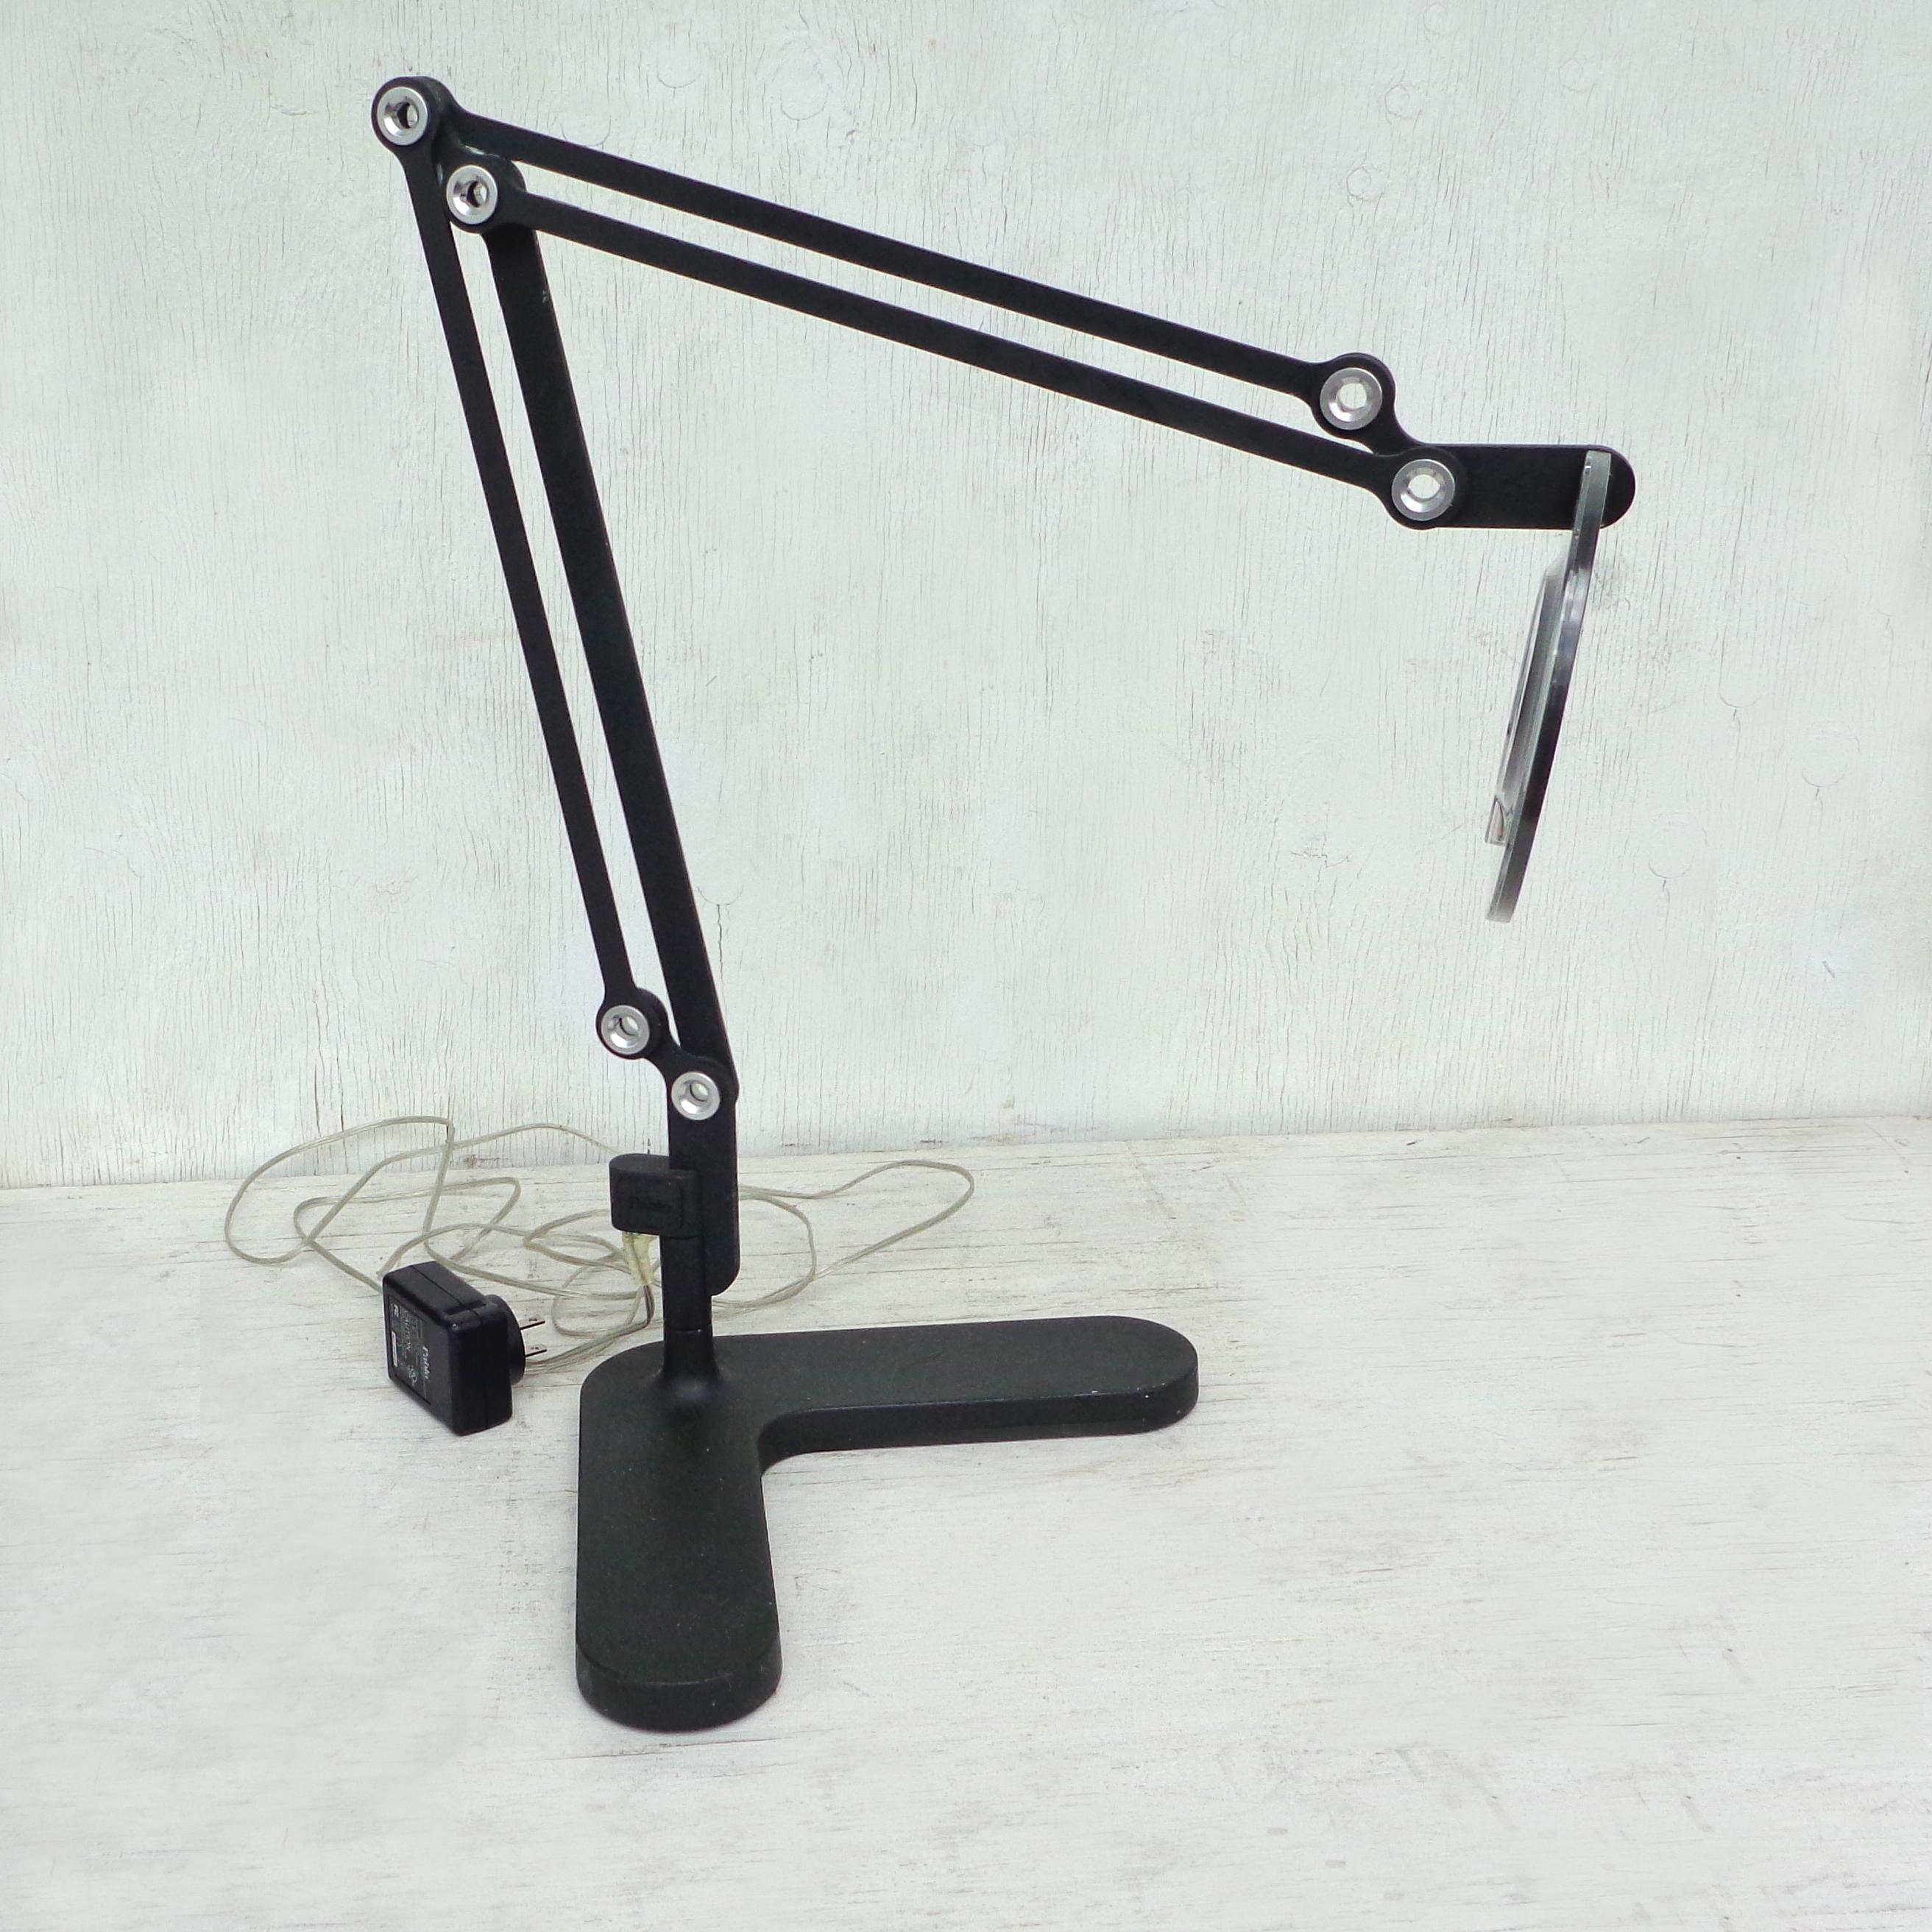 1 link desk lamp by Peter Stathis Pablo Designs

Link modernizes the classic pantograph task lamp, incorporating the most advanced LED lighting technology to date. Designed with a dual-purpose shade/handle, Link seamlessly balances performance and